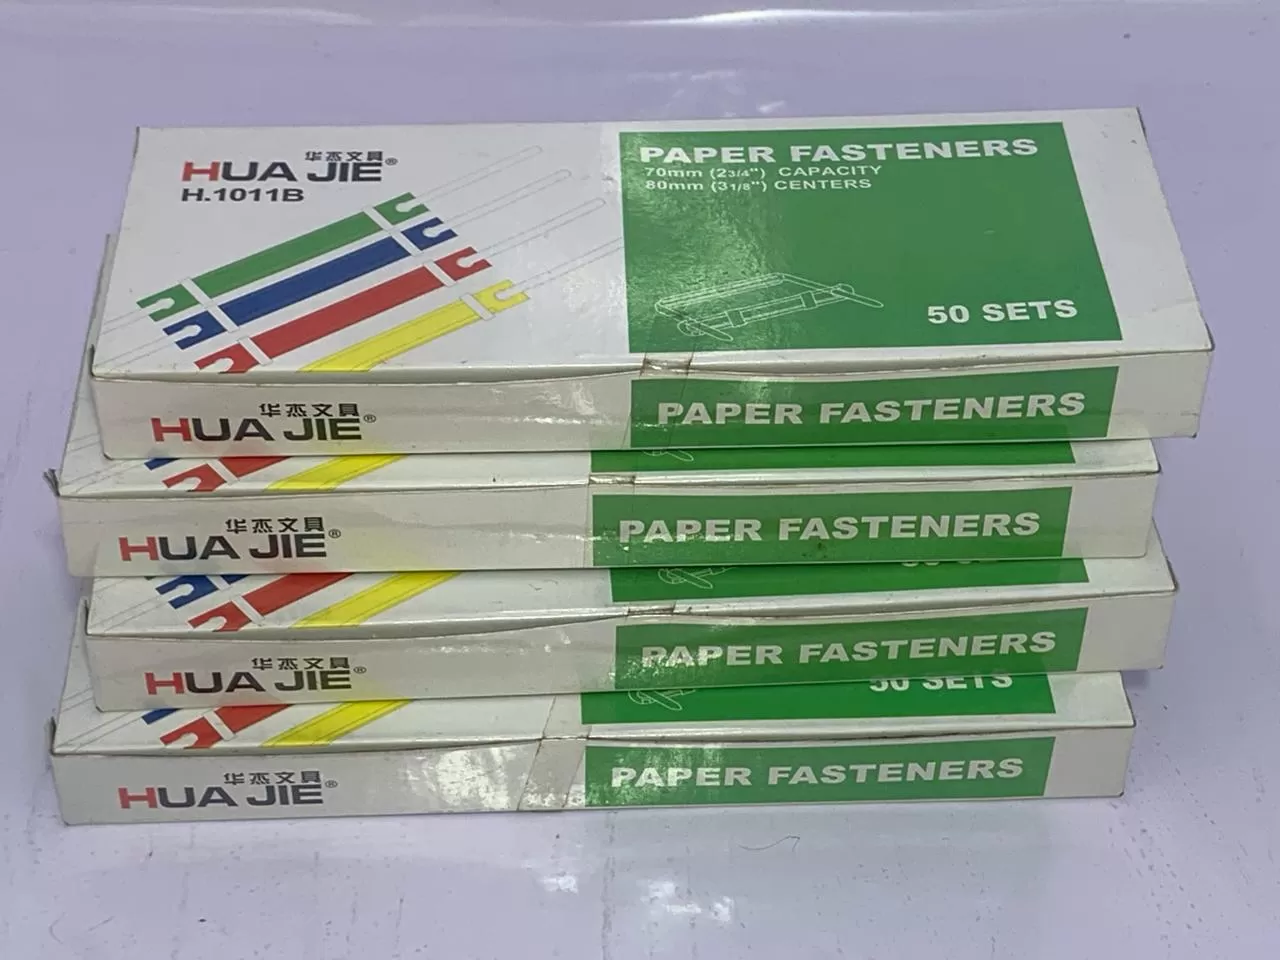 PAPER FASTENERS  CAPACITY 70MM & CENTERS 80MM  50PC PACK